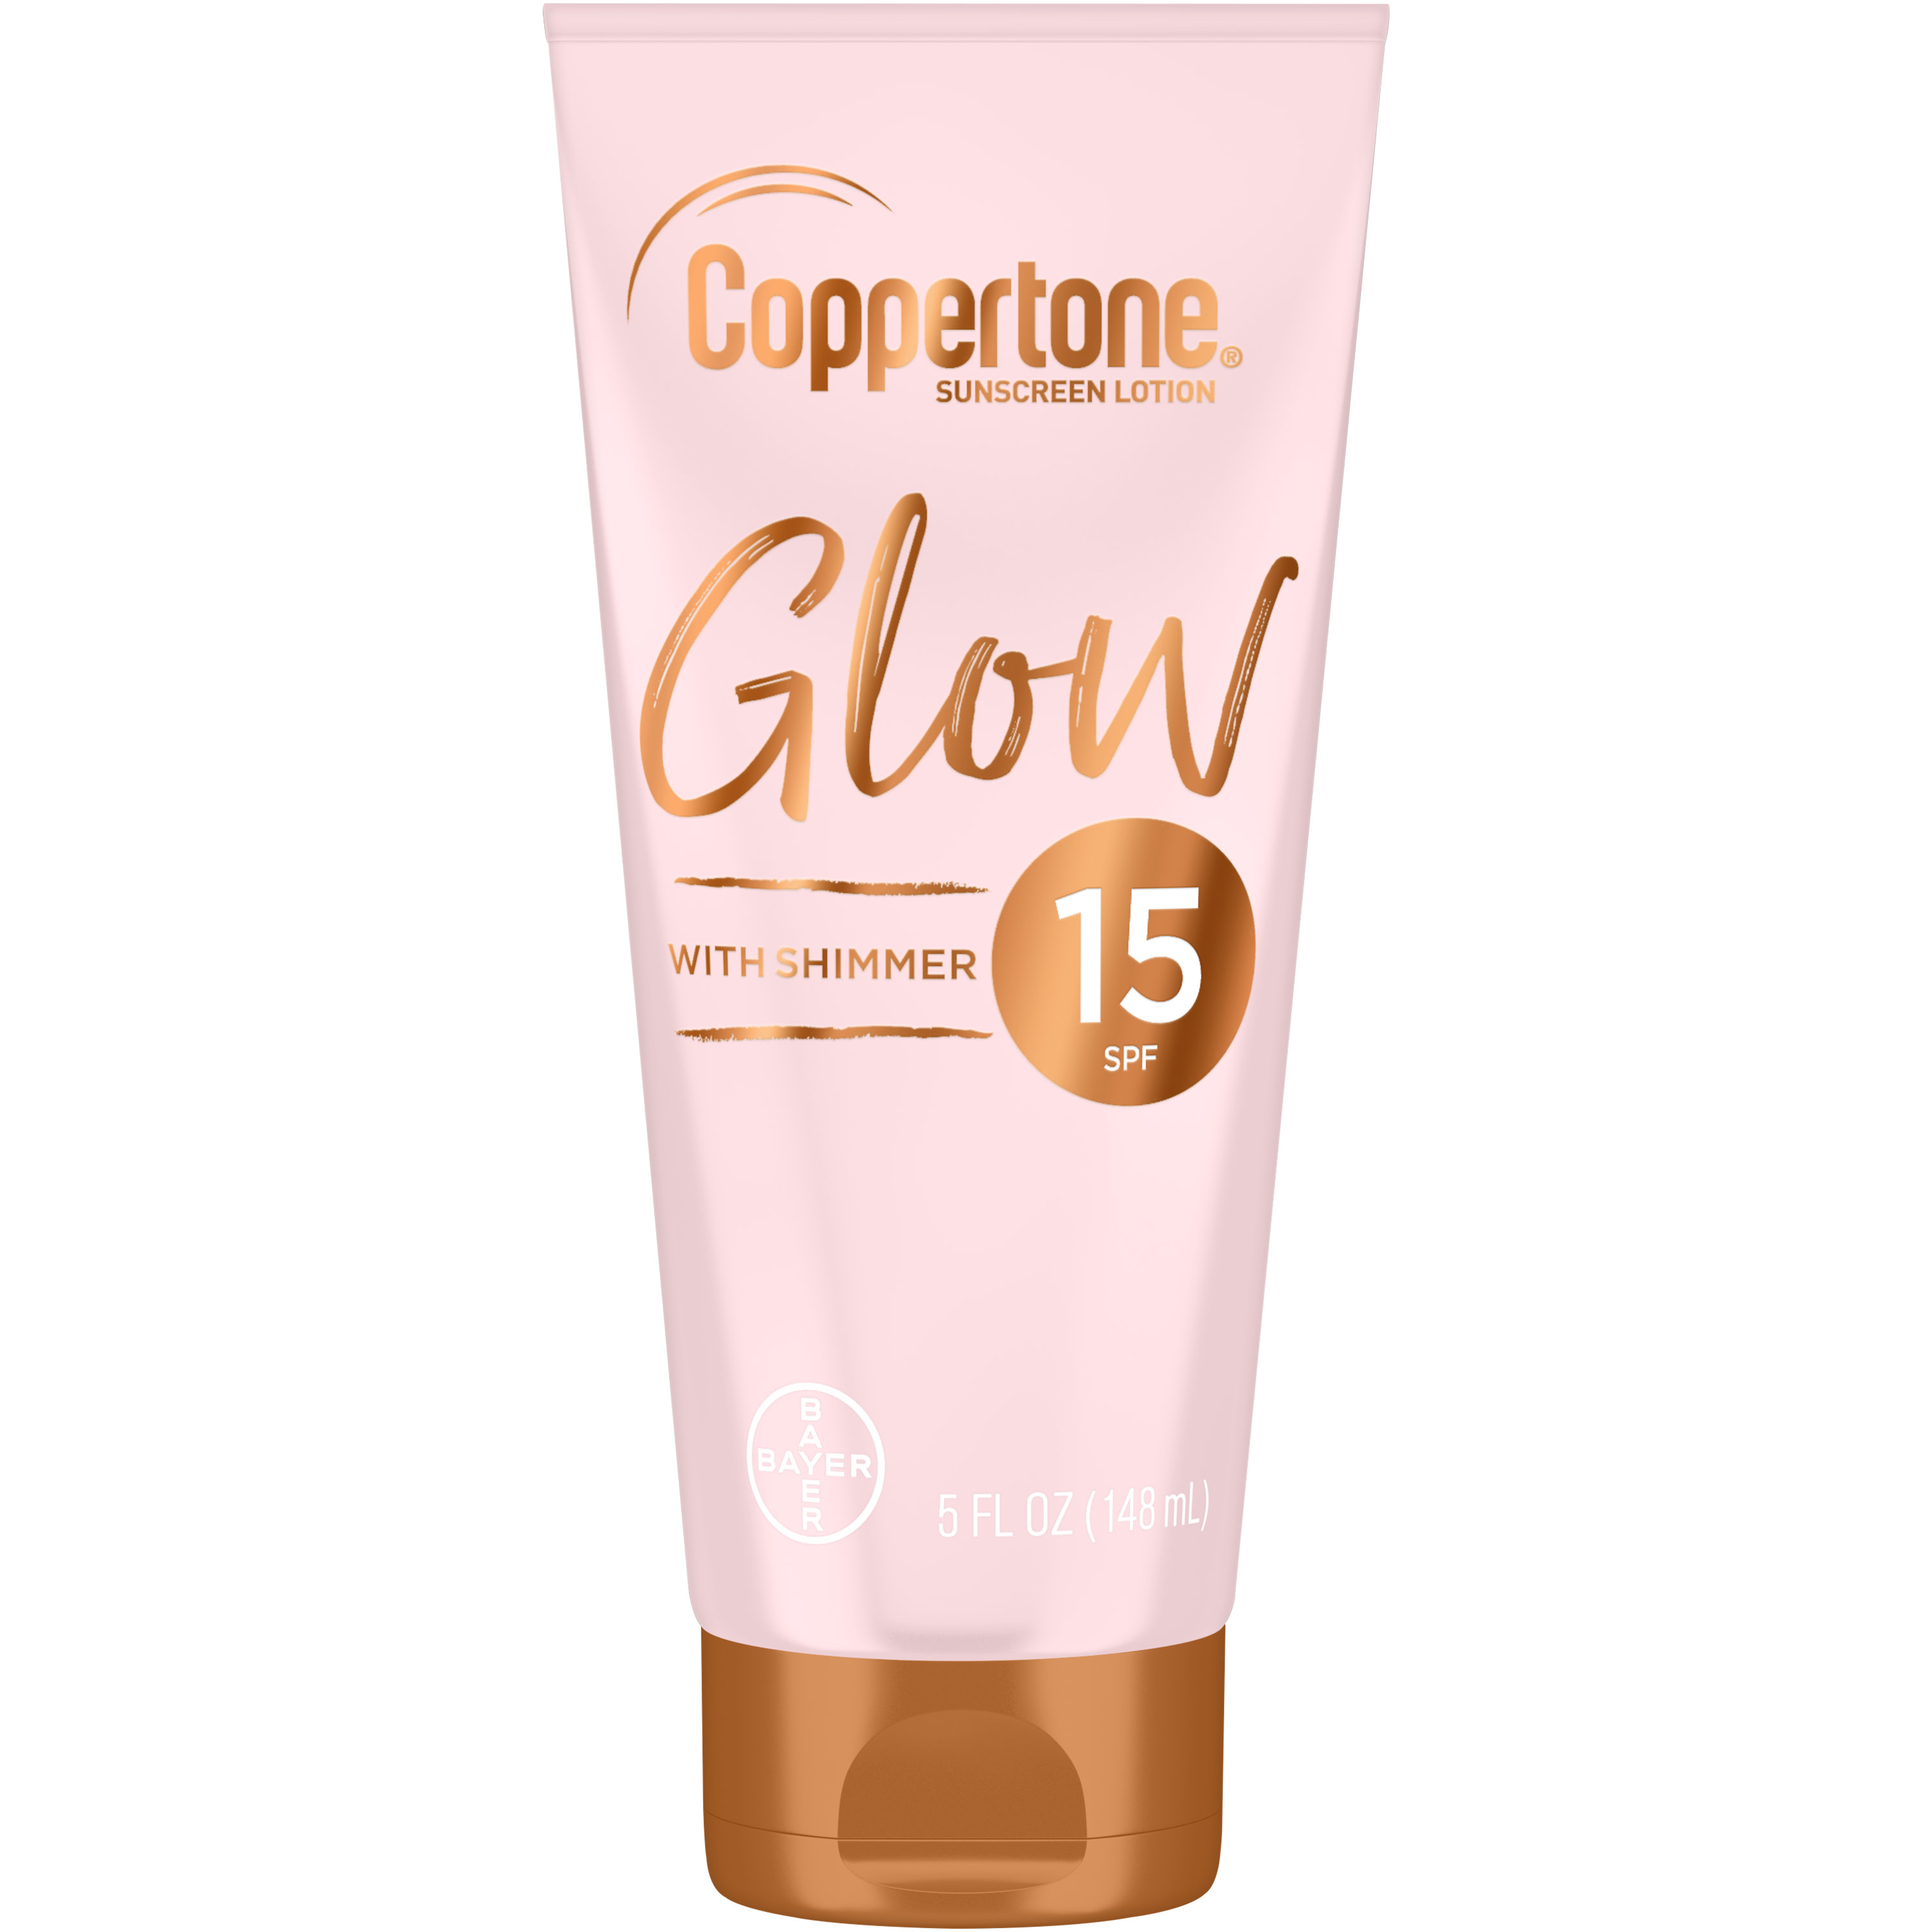 Coppertone Glow Shimmering Sunscreen Lotion with Broad Spectrum SPF 15, 5 oz - image 1 of 6